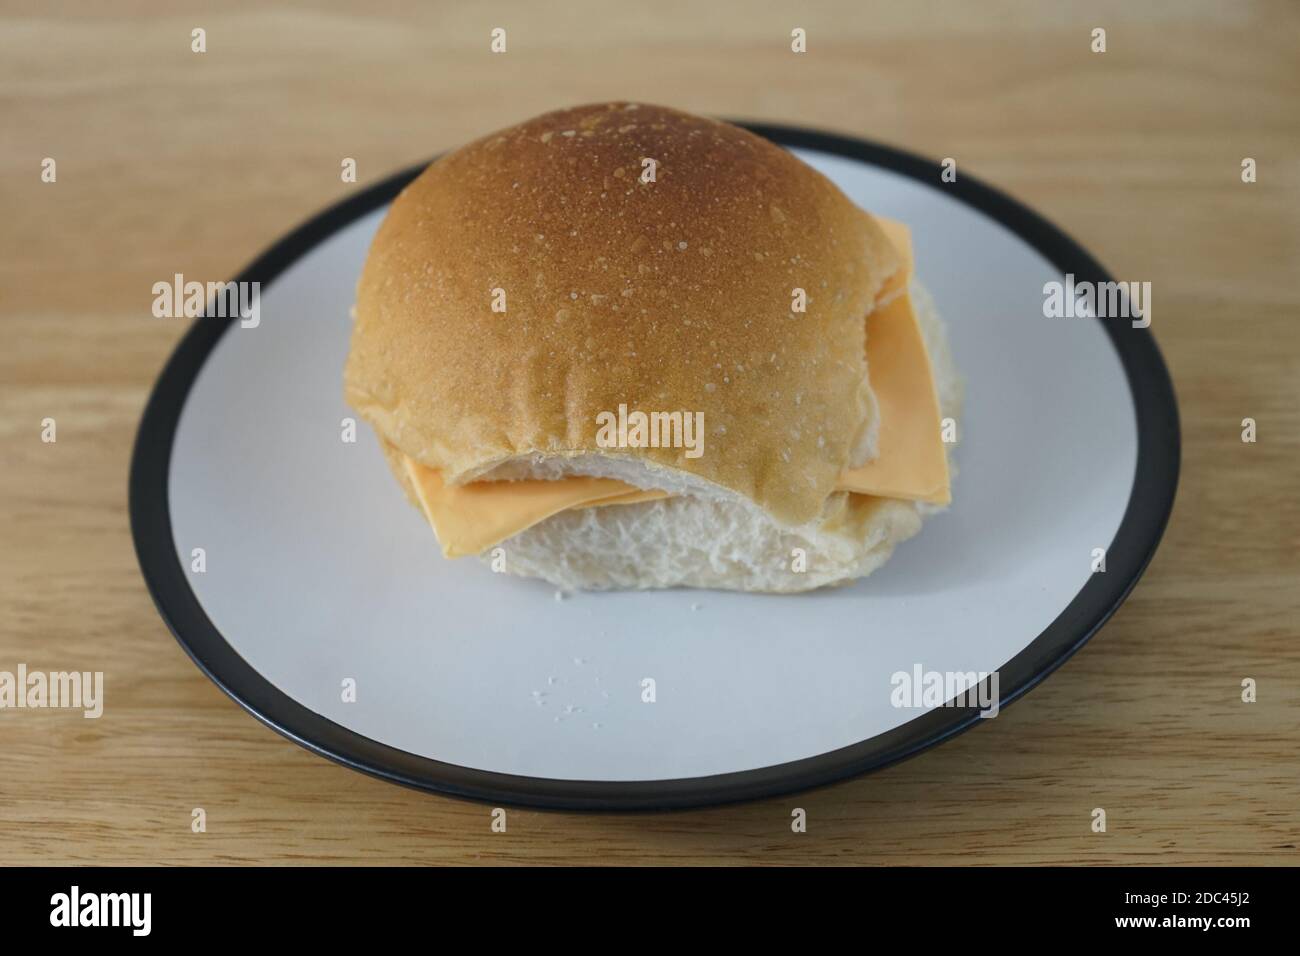 Lonely looking plain cheese roll on a plate Stock Photo